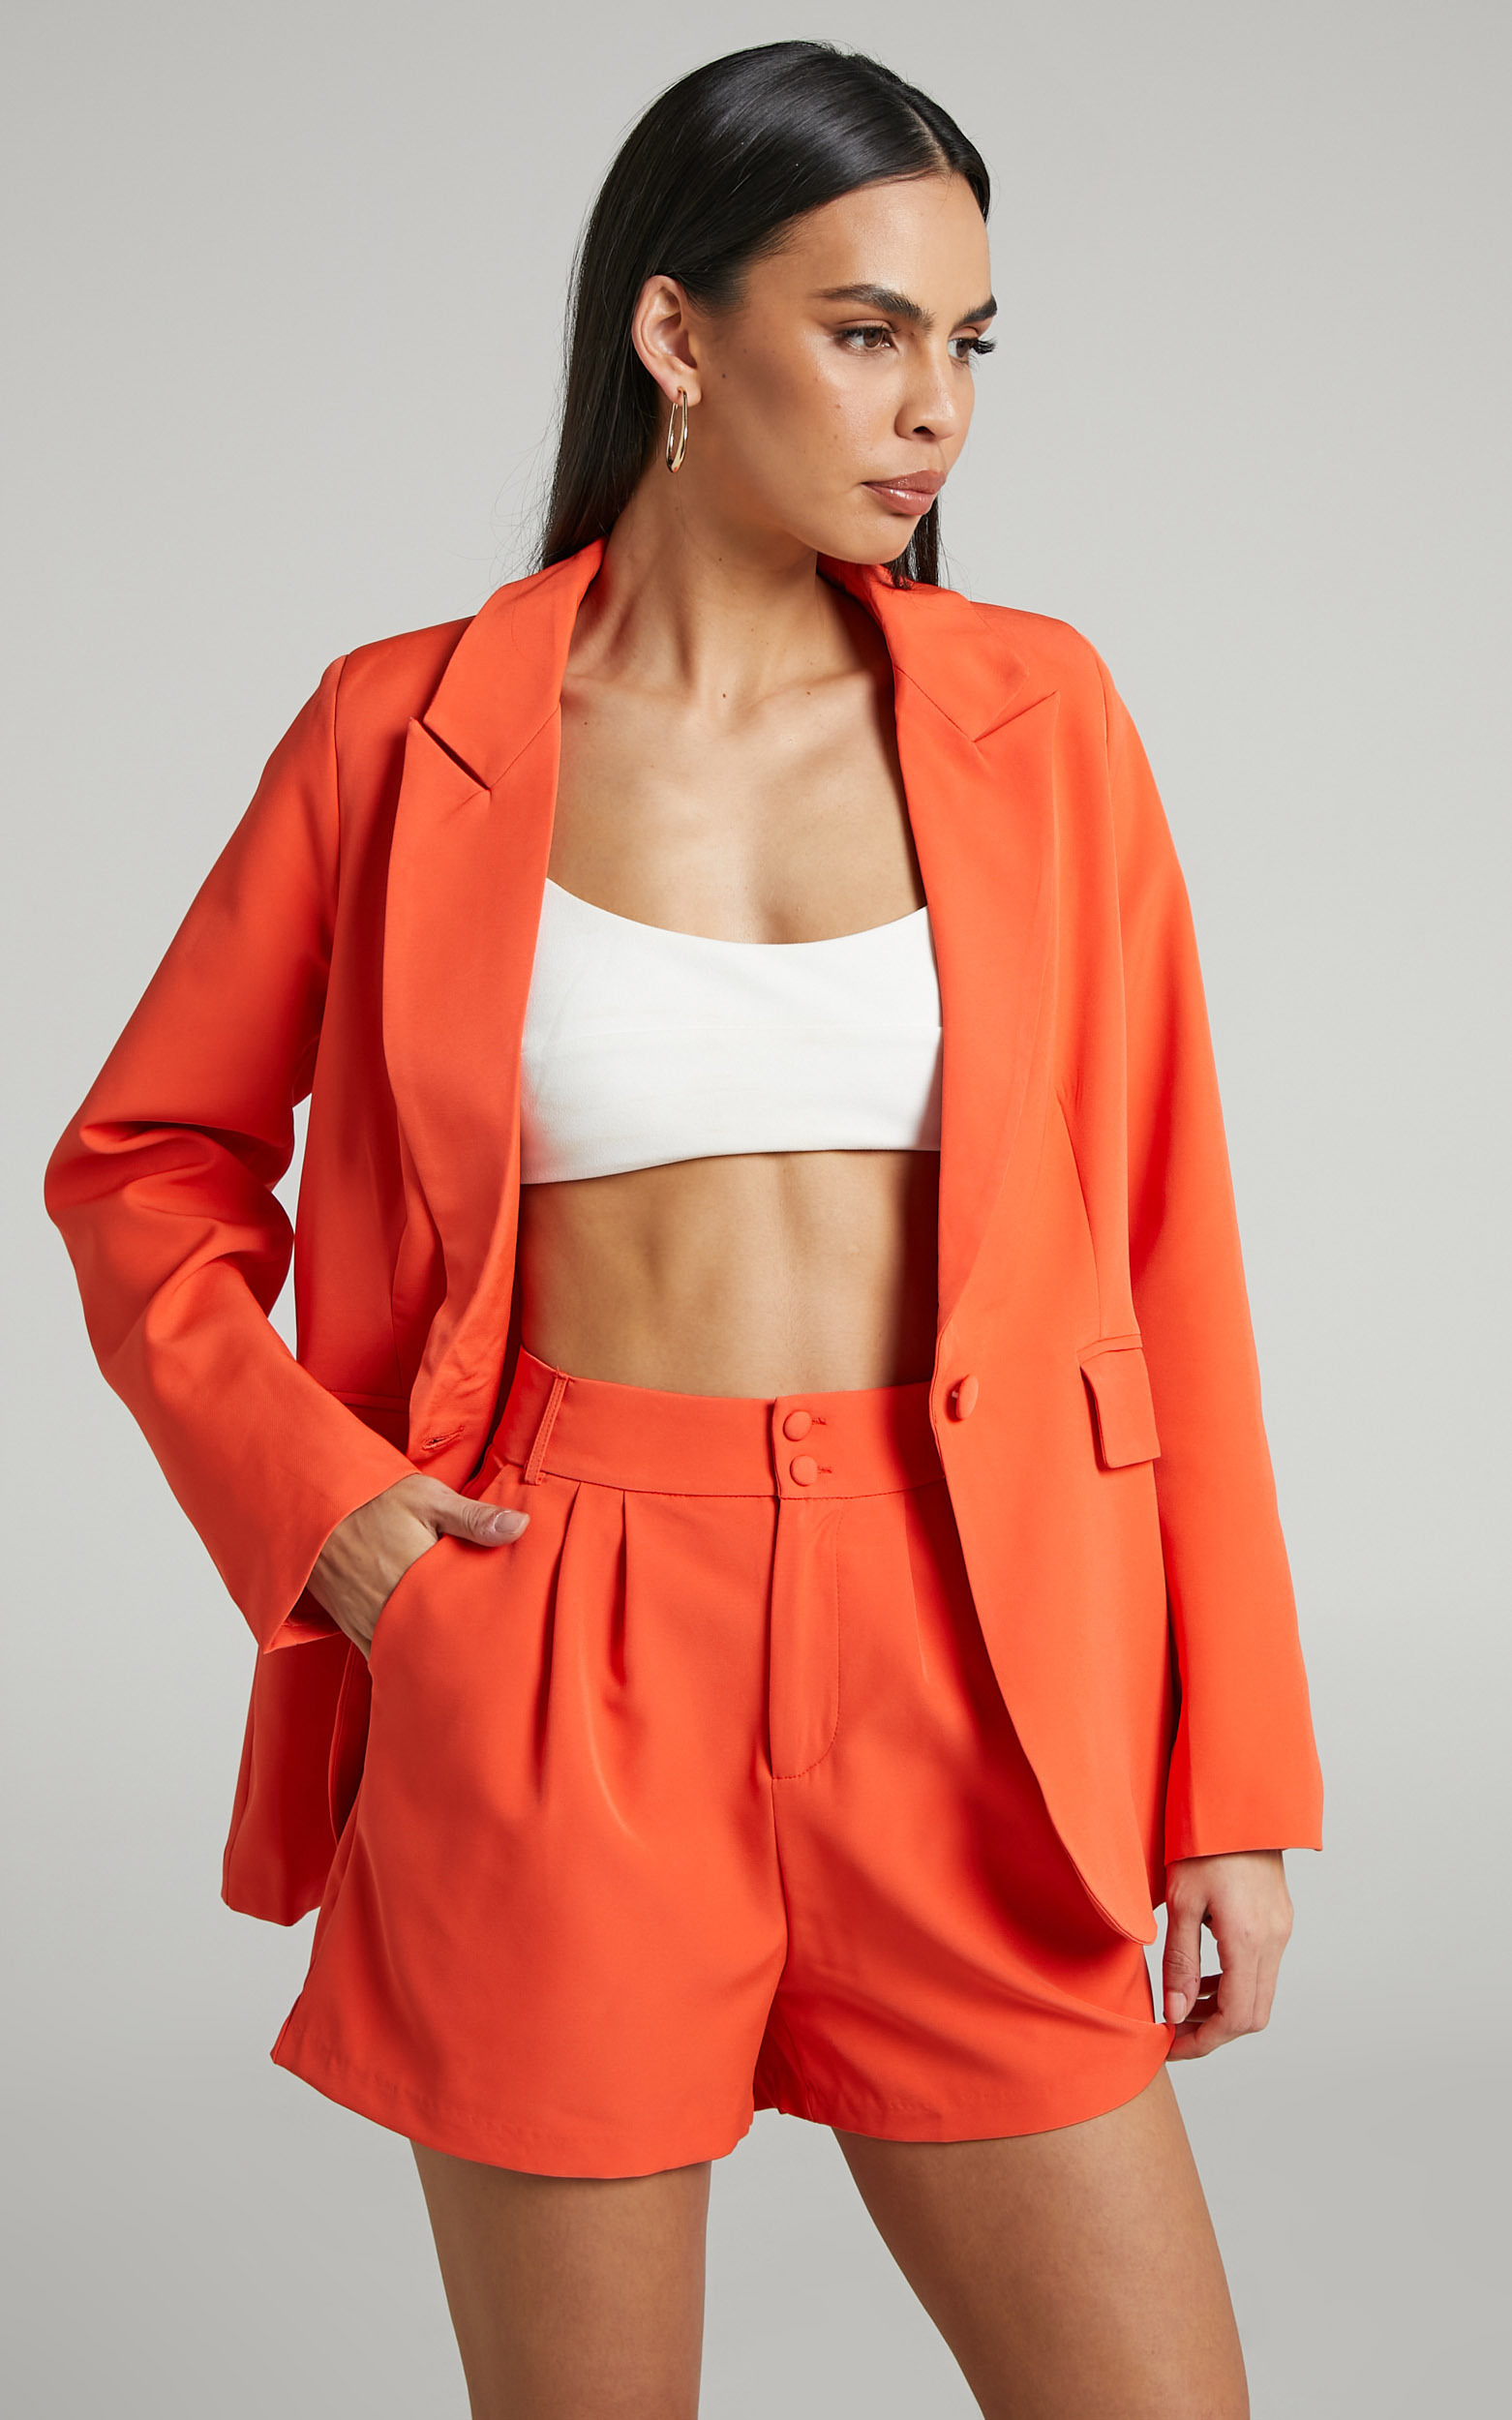 Ashesha Tailored Suiting Blazer in Oxy Fire - 04, RED2, hi-res image number null